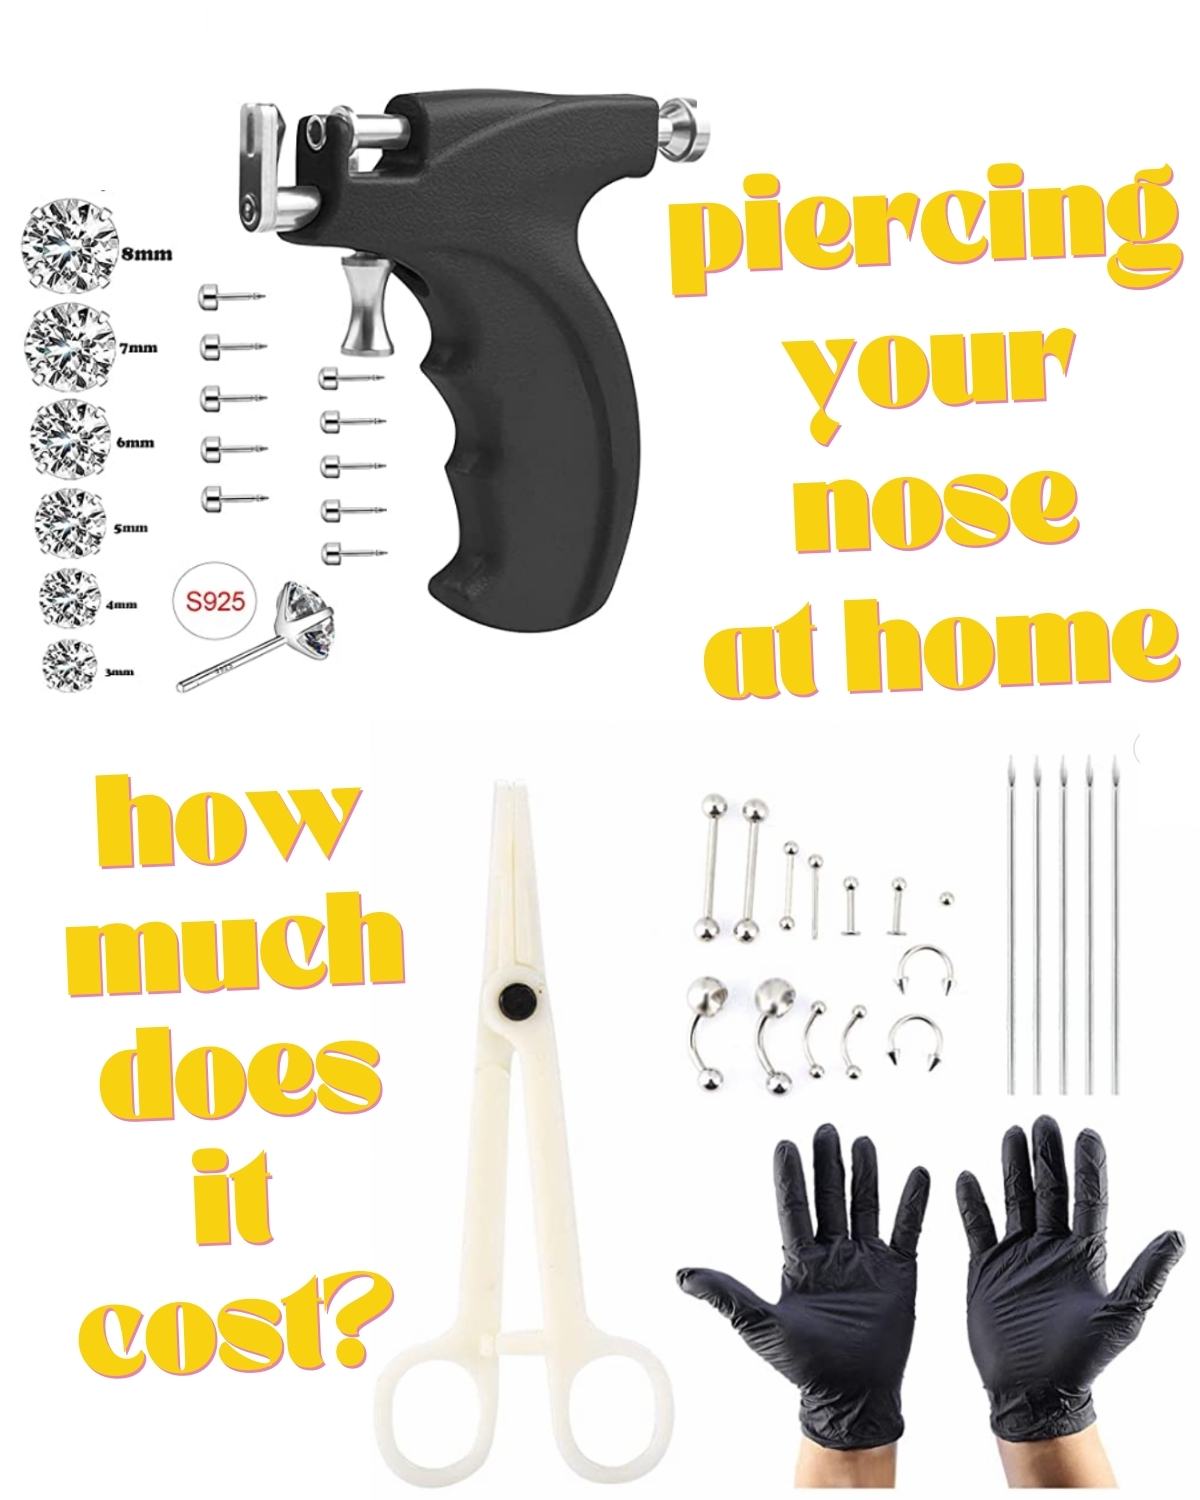 Photo of piercing tools you can find on Amazon